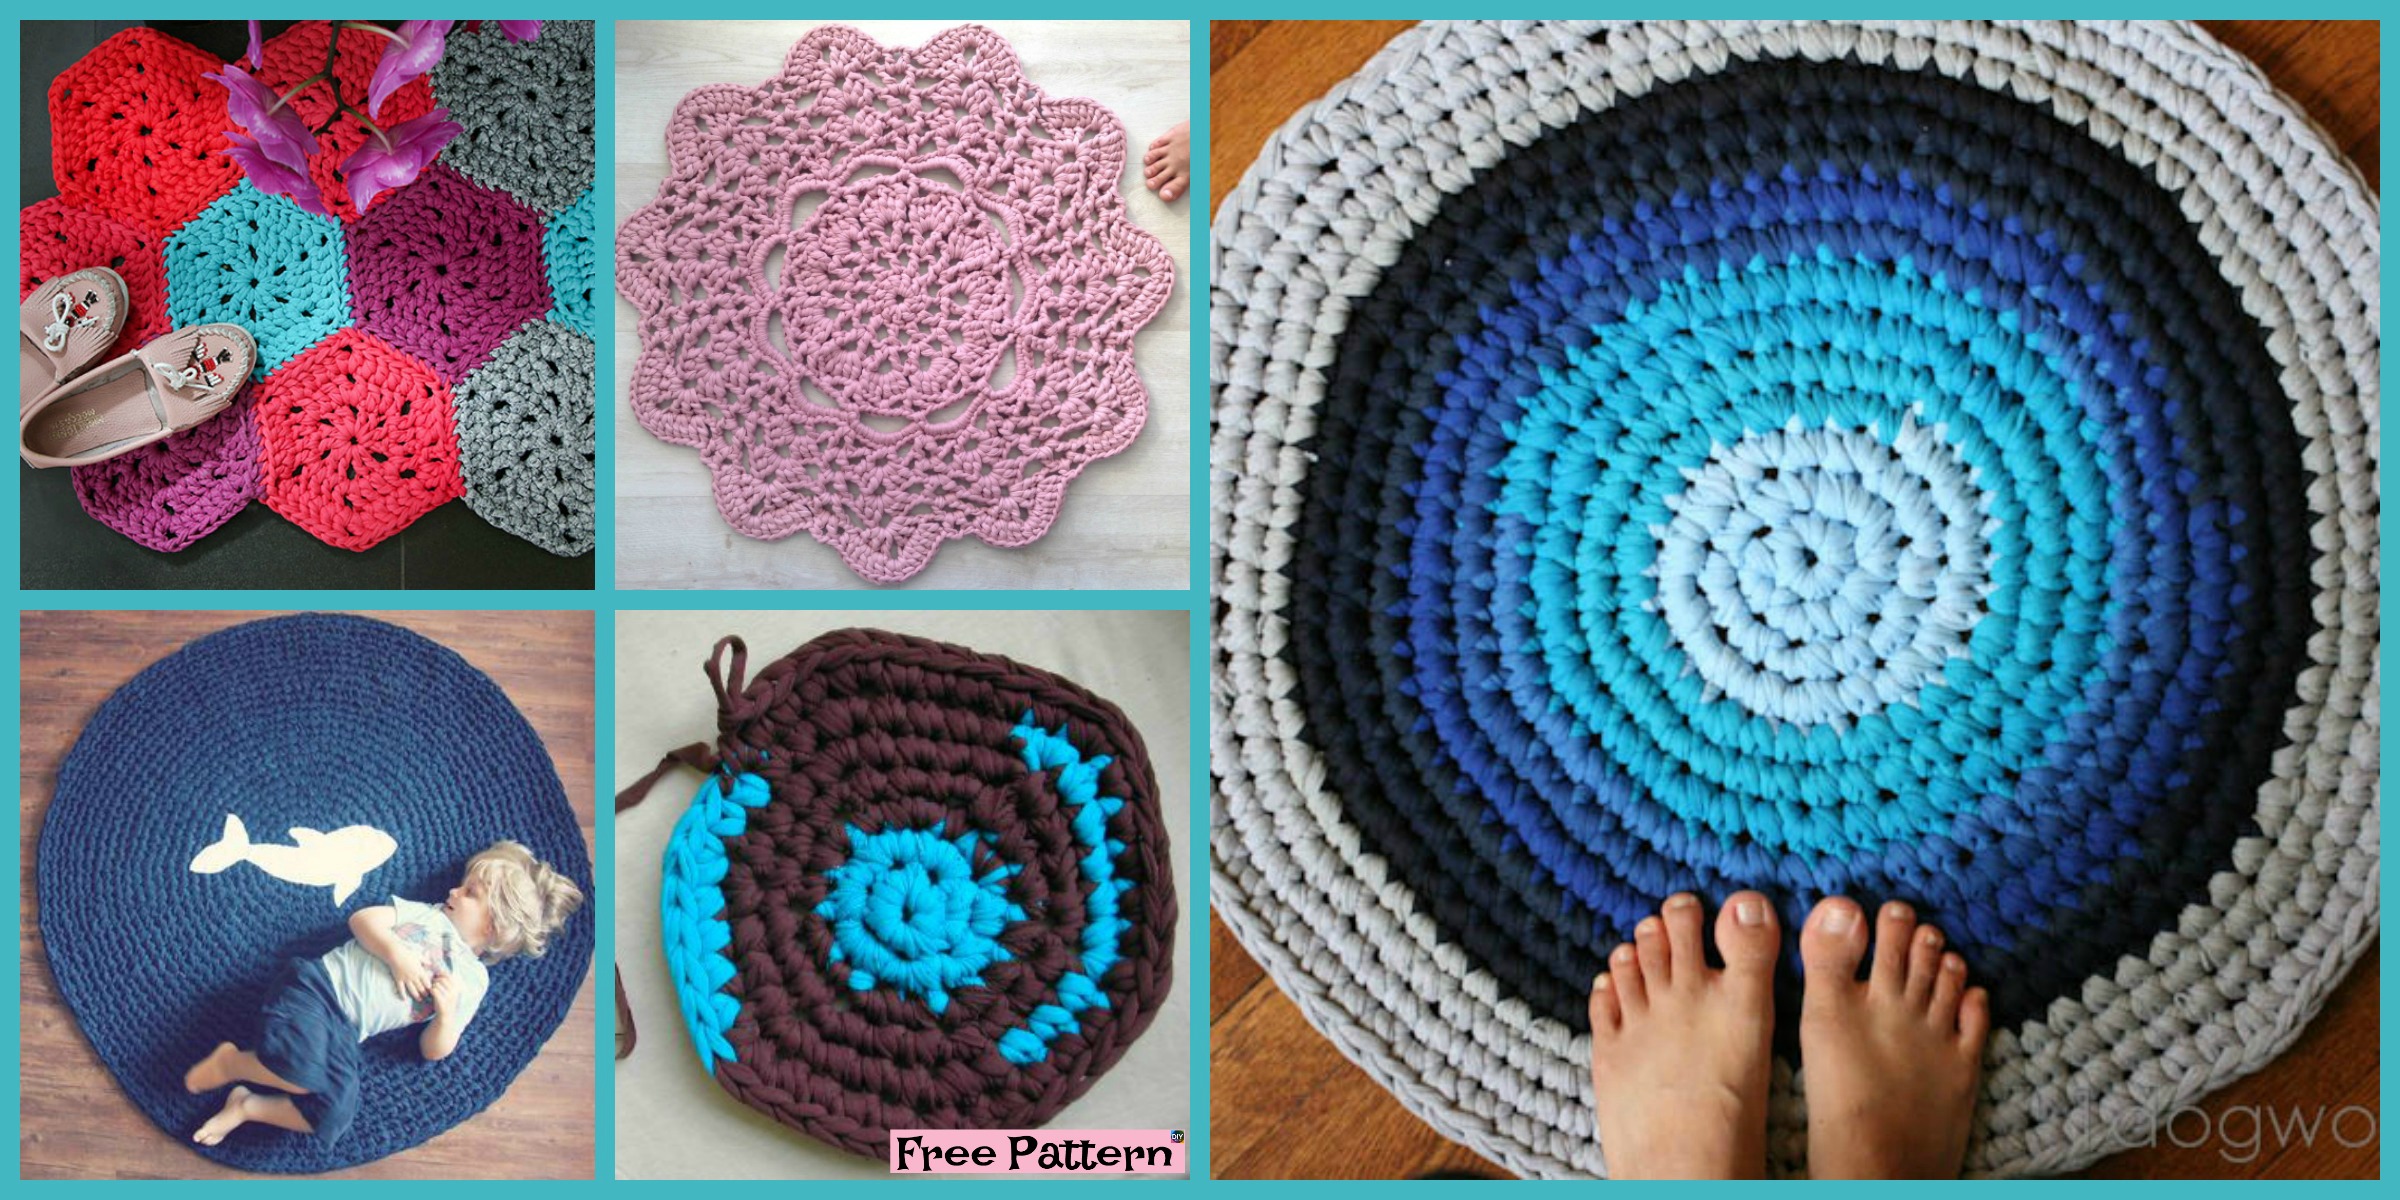 10 Awesome Crochet Rug from Shirts Free Patterns